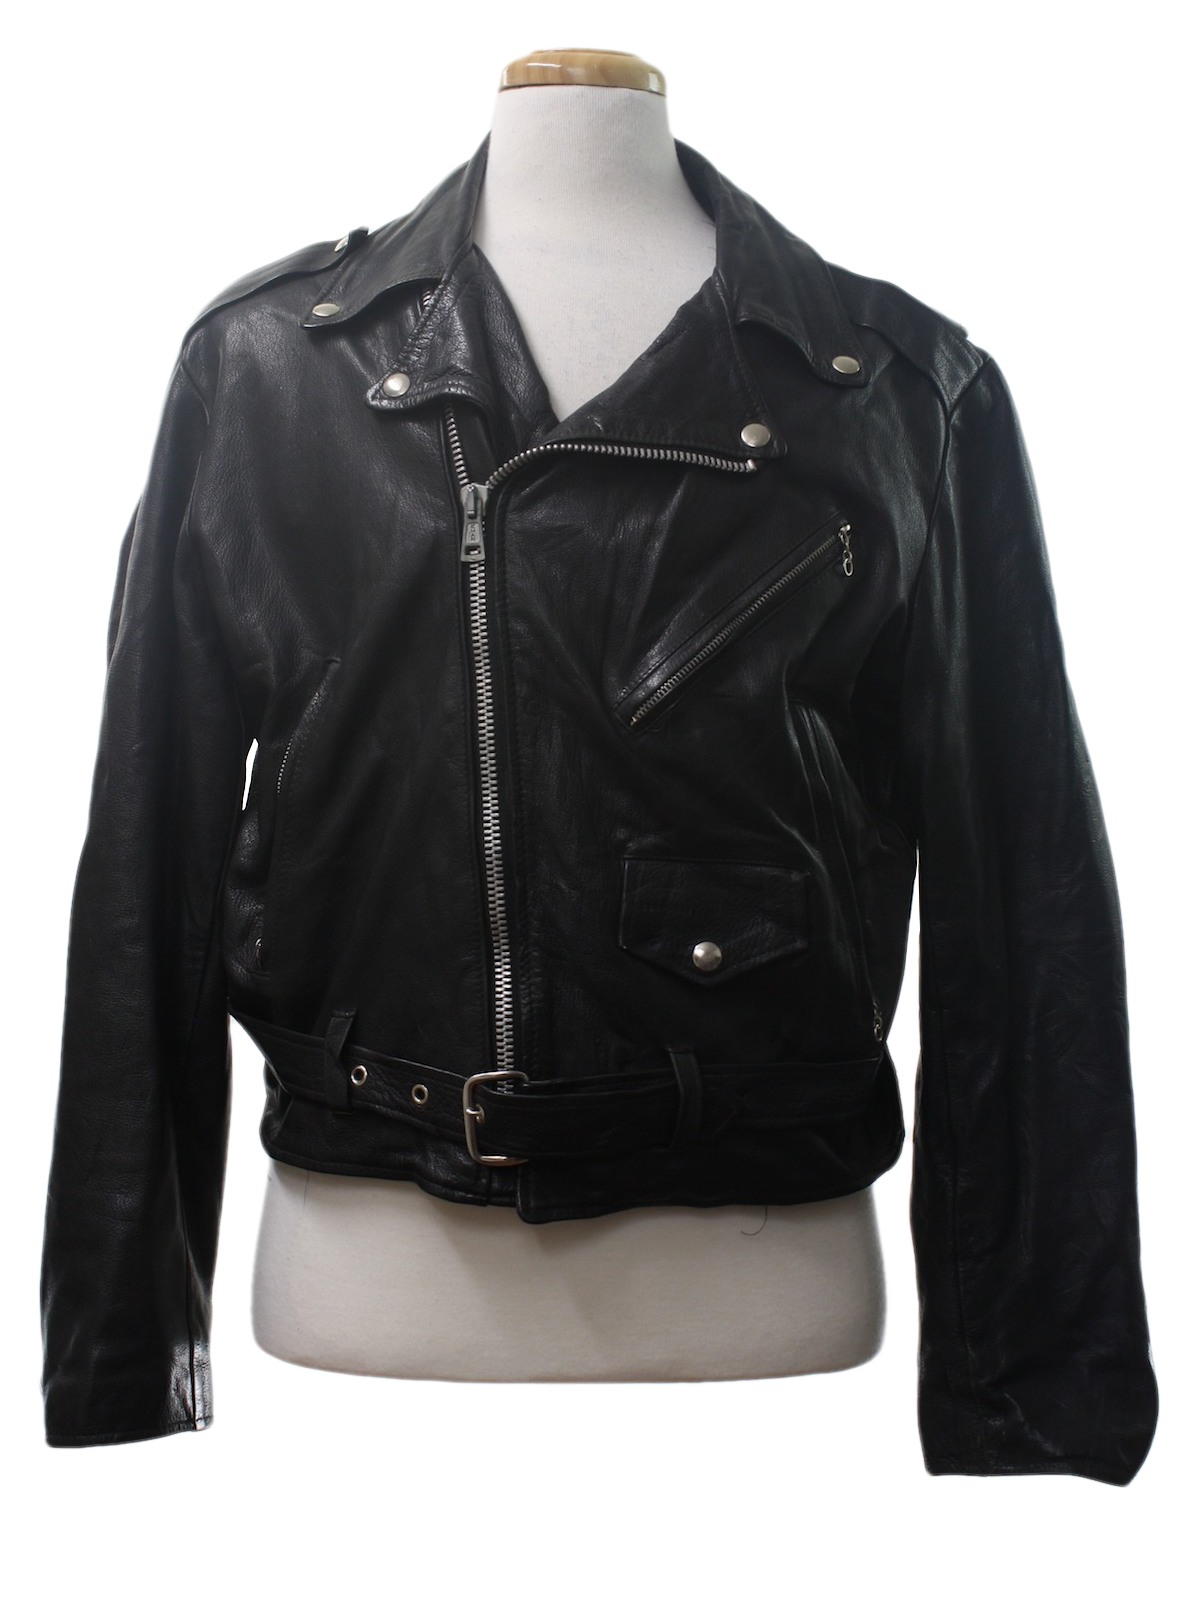 1970's Leather Jacket: Early 70s -Excelled it sells because it excels ...